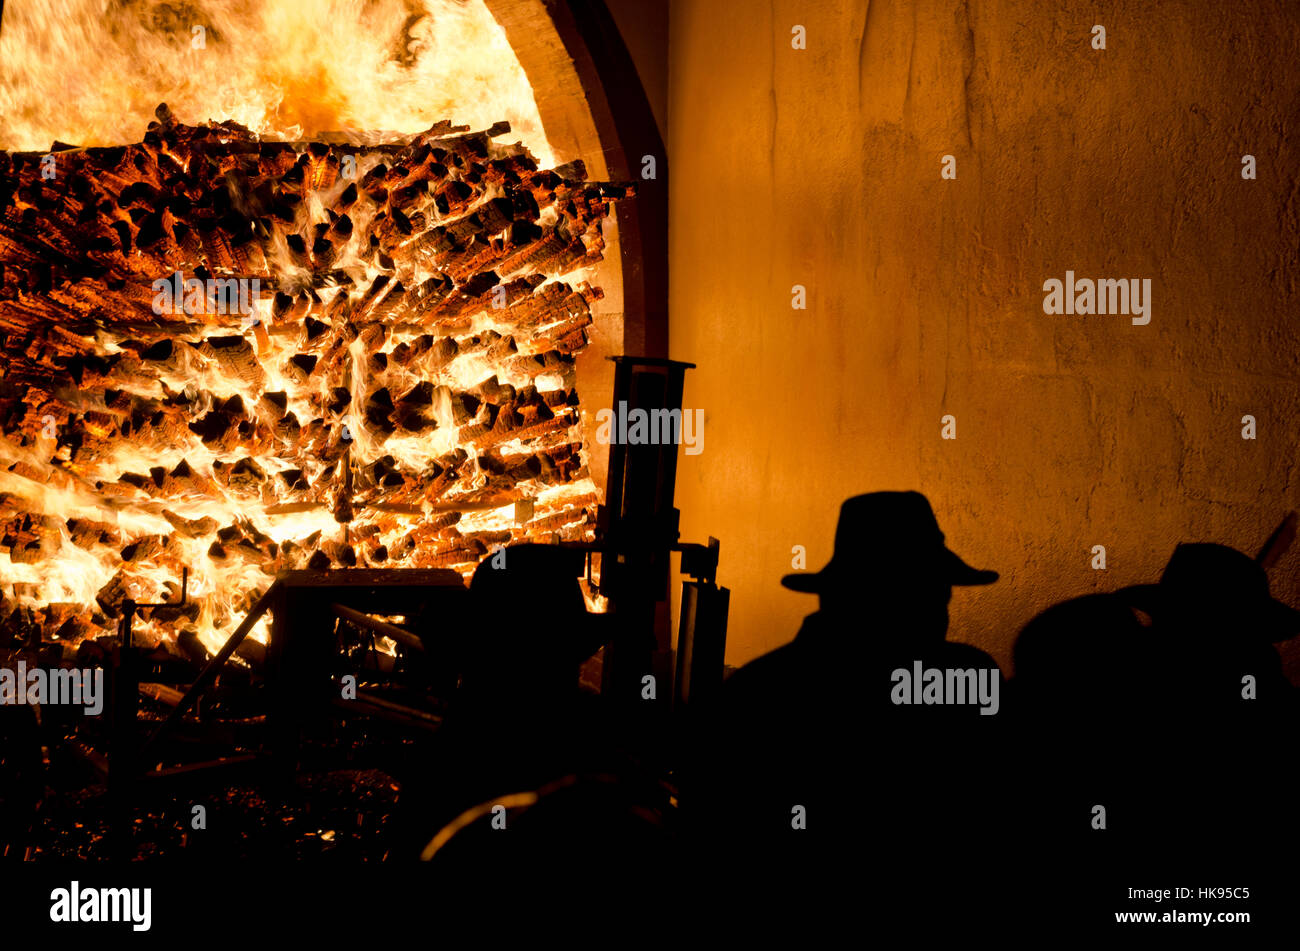 Every year at carnevale in Basel region the usualy quite town Liestal seems to be set on fire. 'Chienbäse' is the name of the spectacle, carriers load Stock Photo